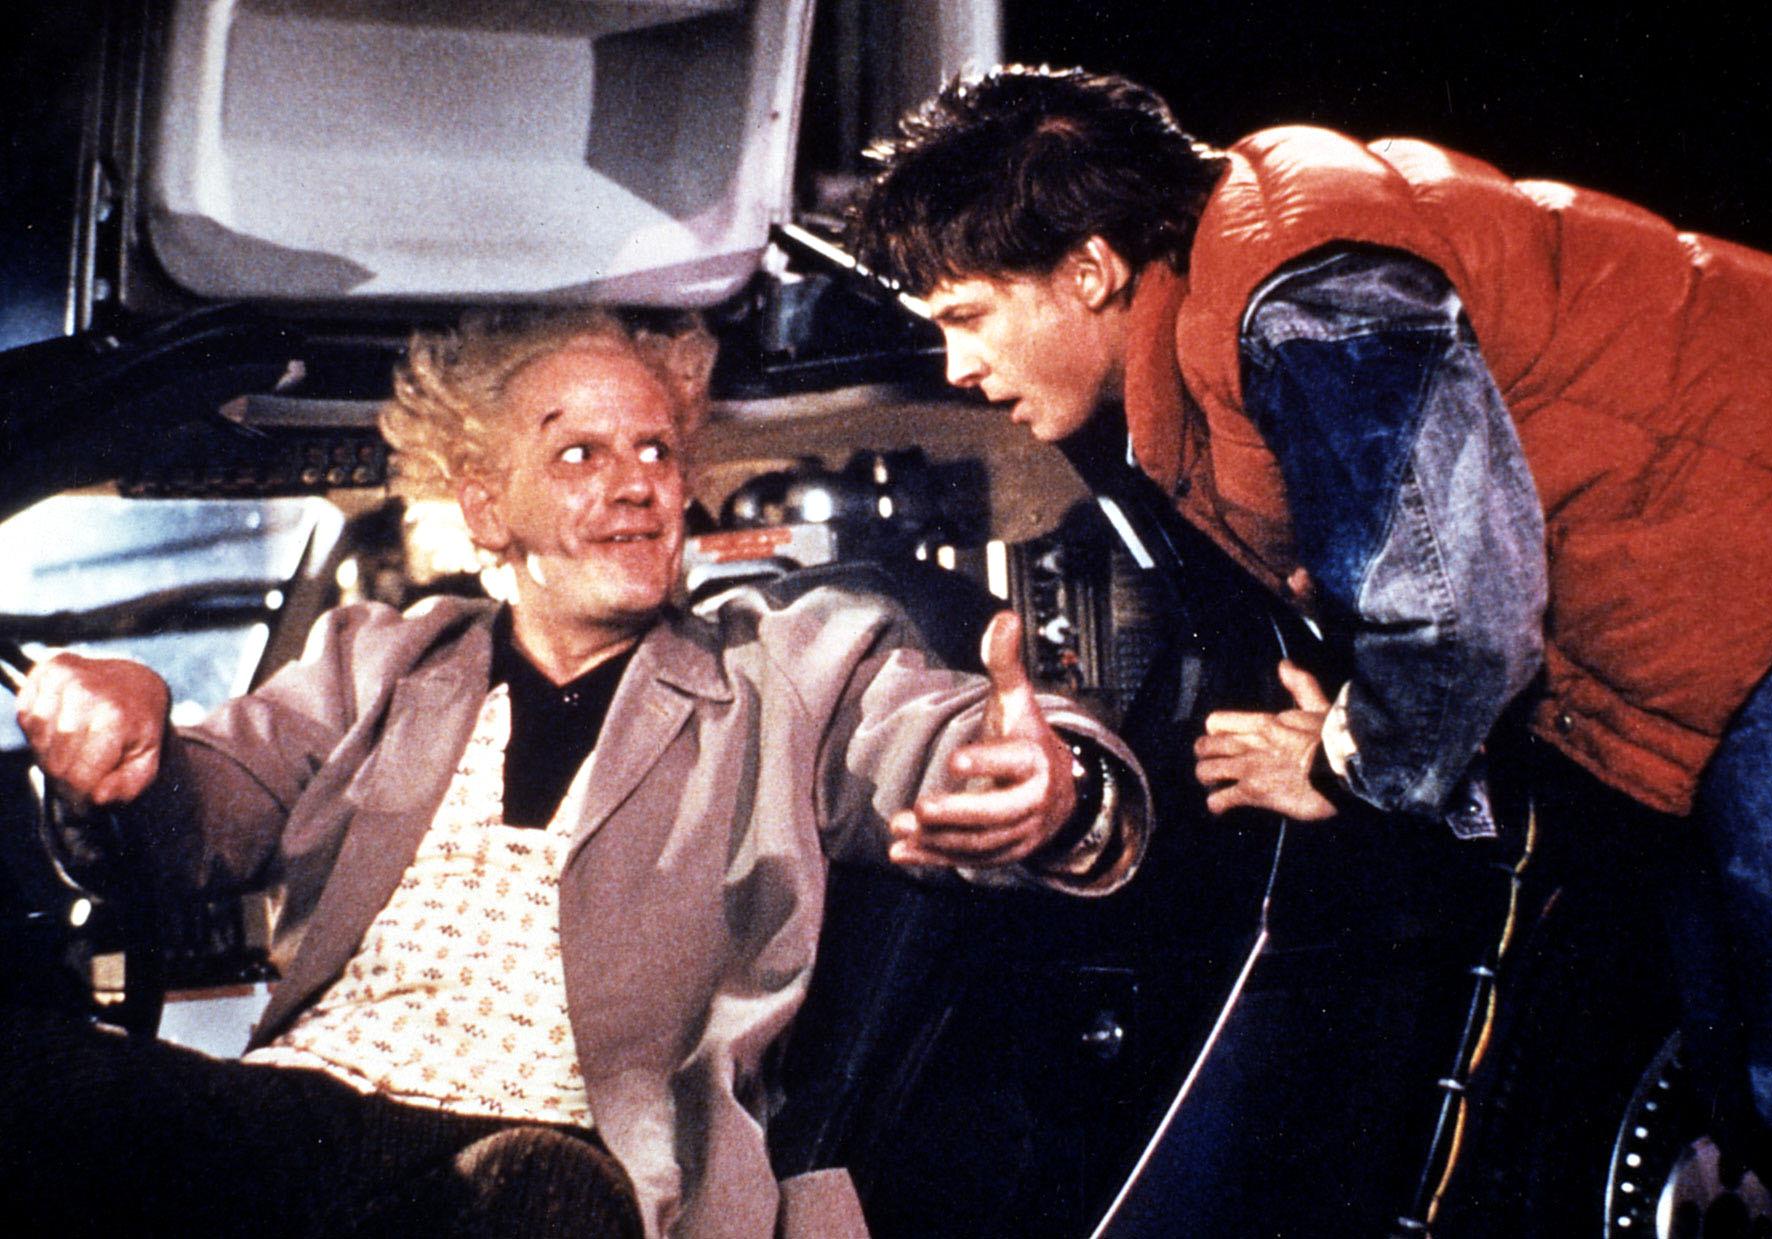 Michael J. Fox and Christopher Lloyd on the set of "Back to the Future" in 1984 | Source: Getty Images